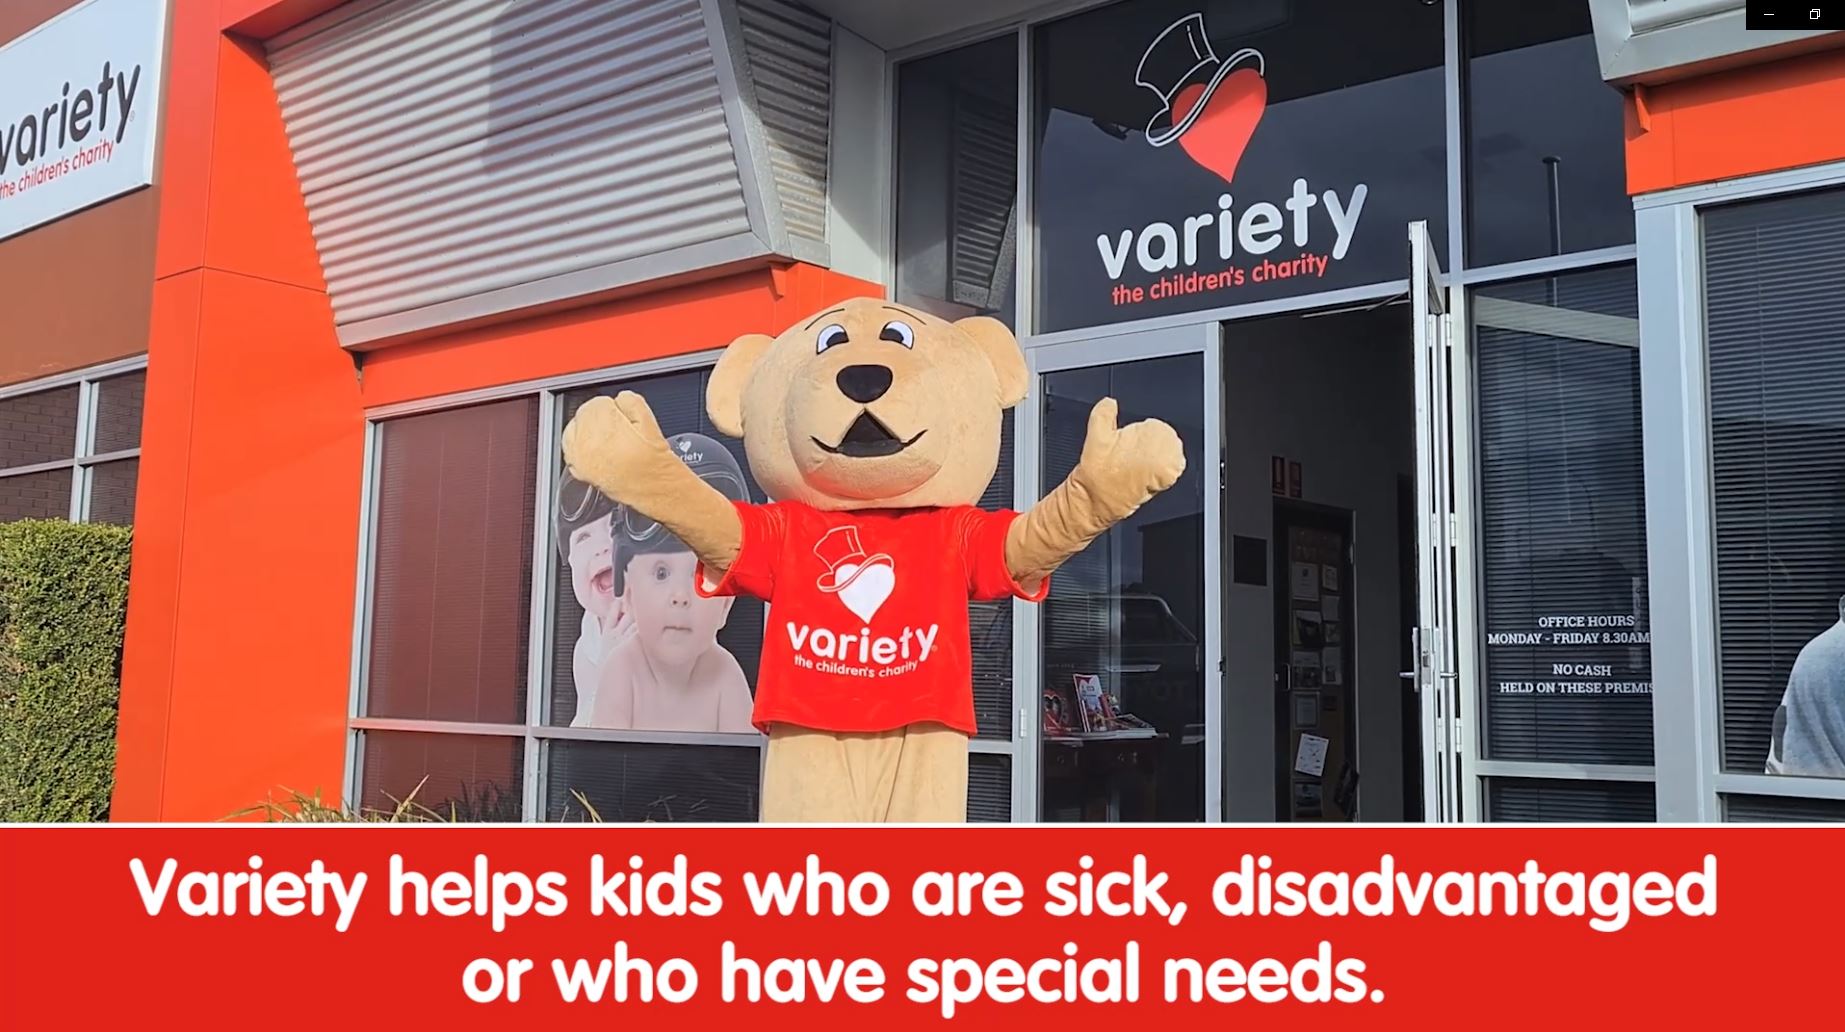 Vote for the Variety Mascot Sheridan in the Royal Adelaide Show at Home Mascot Dance Off